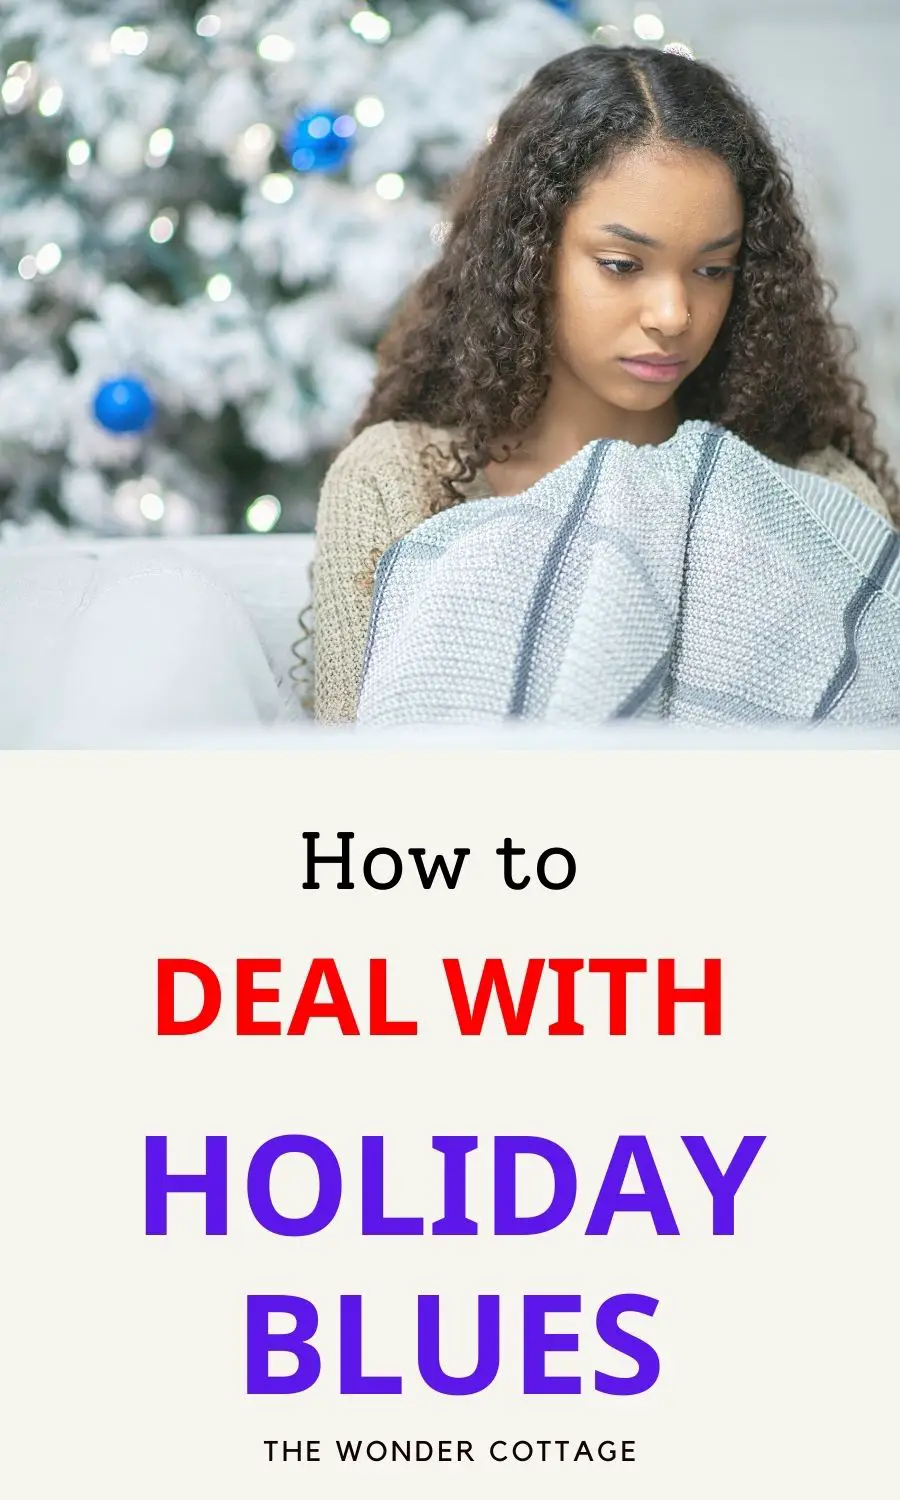 How to deal with the holiday blues